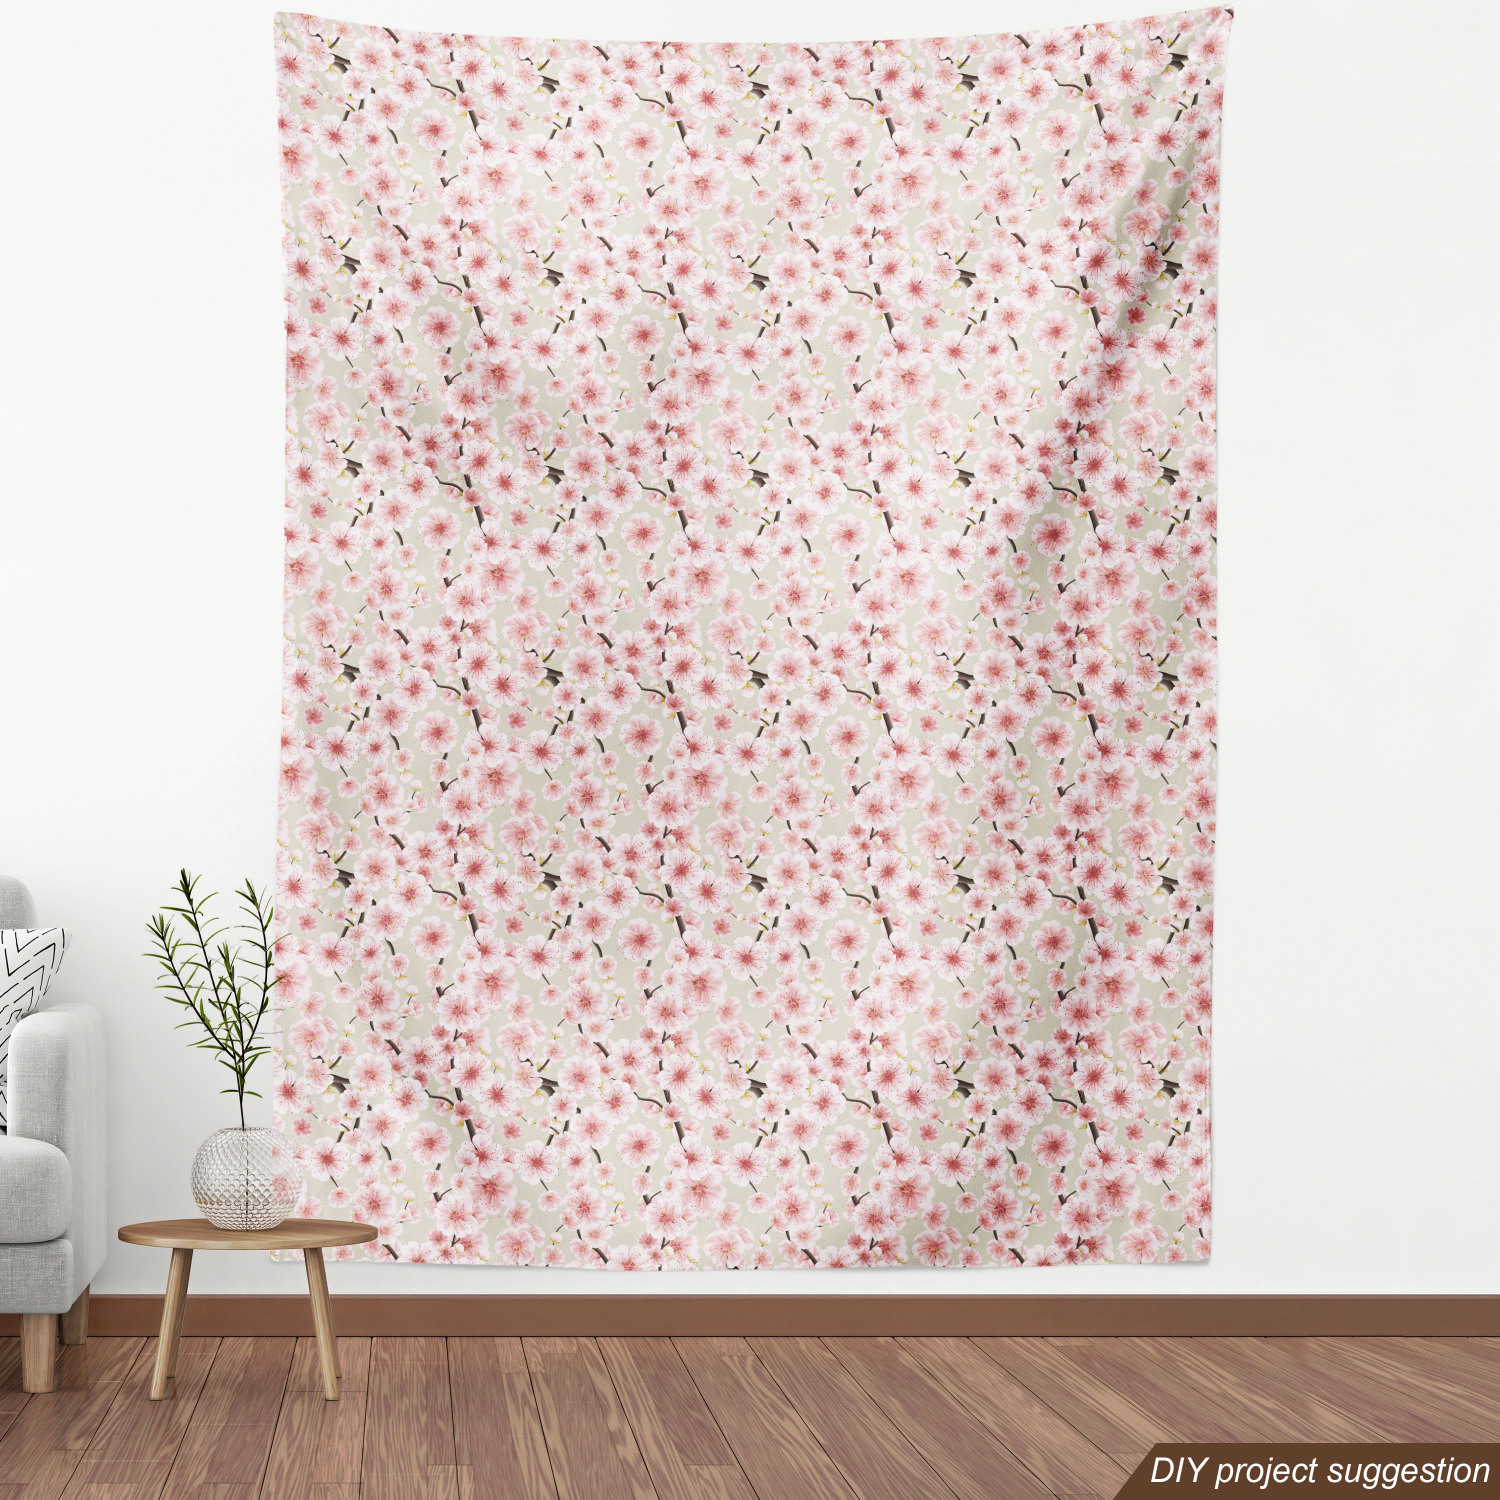 Cherry Blossom Fabric by the Yard, Japanese Flowers Symbolic of Spring in a Random Arrangement, Decorative Upholstery Fabric for Chairs & Home Accents, 1 Yard, Coral Pale Green Brown by Ambesonne - image 3 of 4